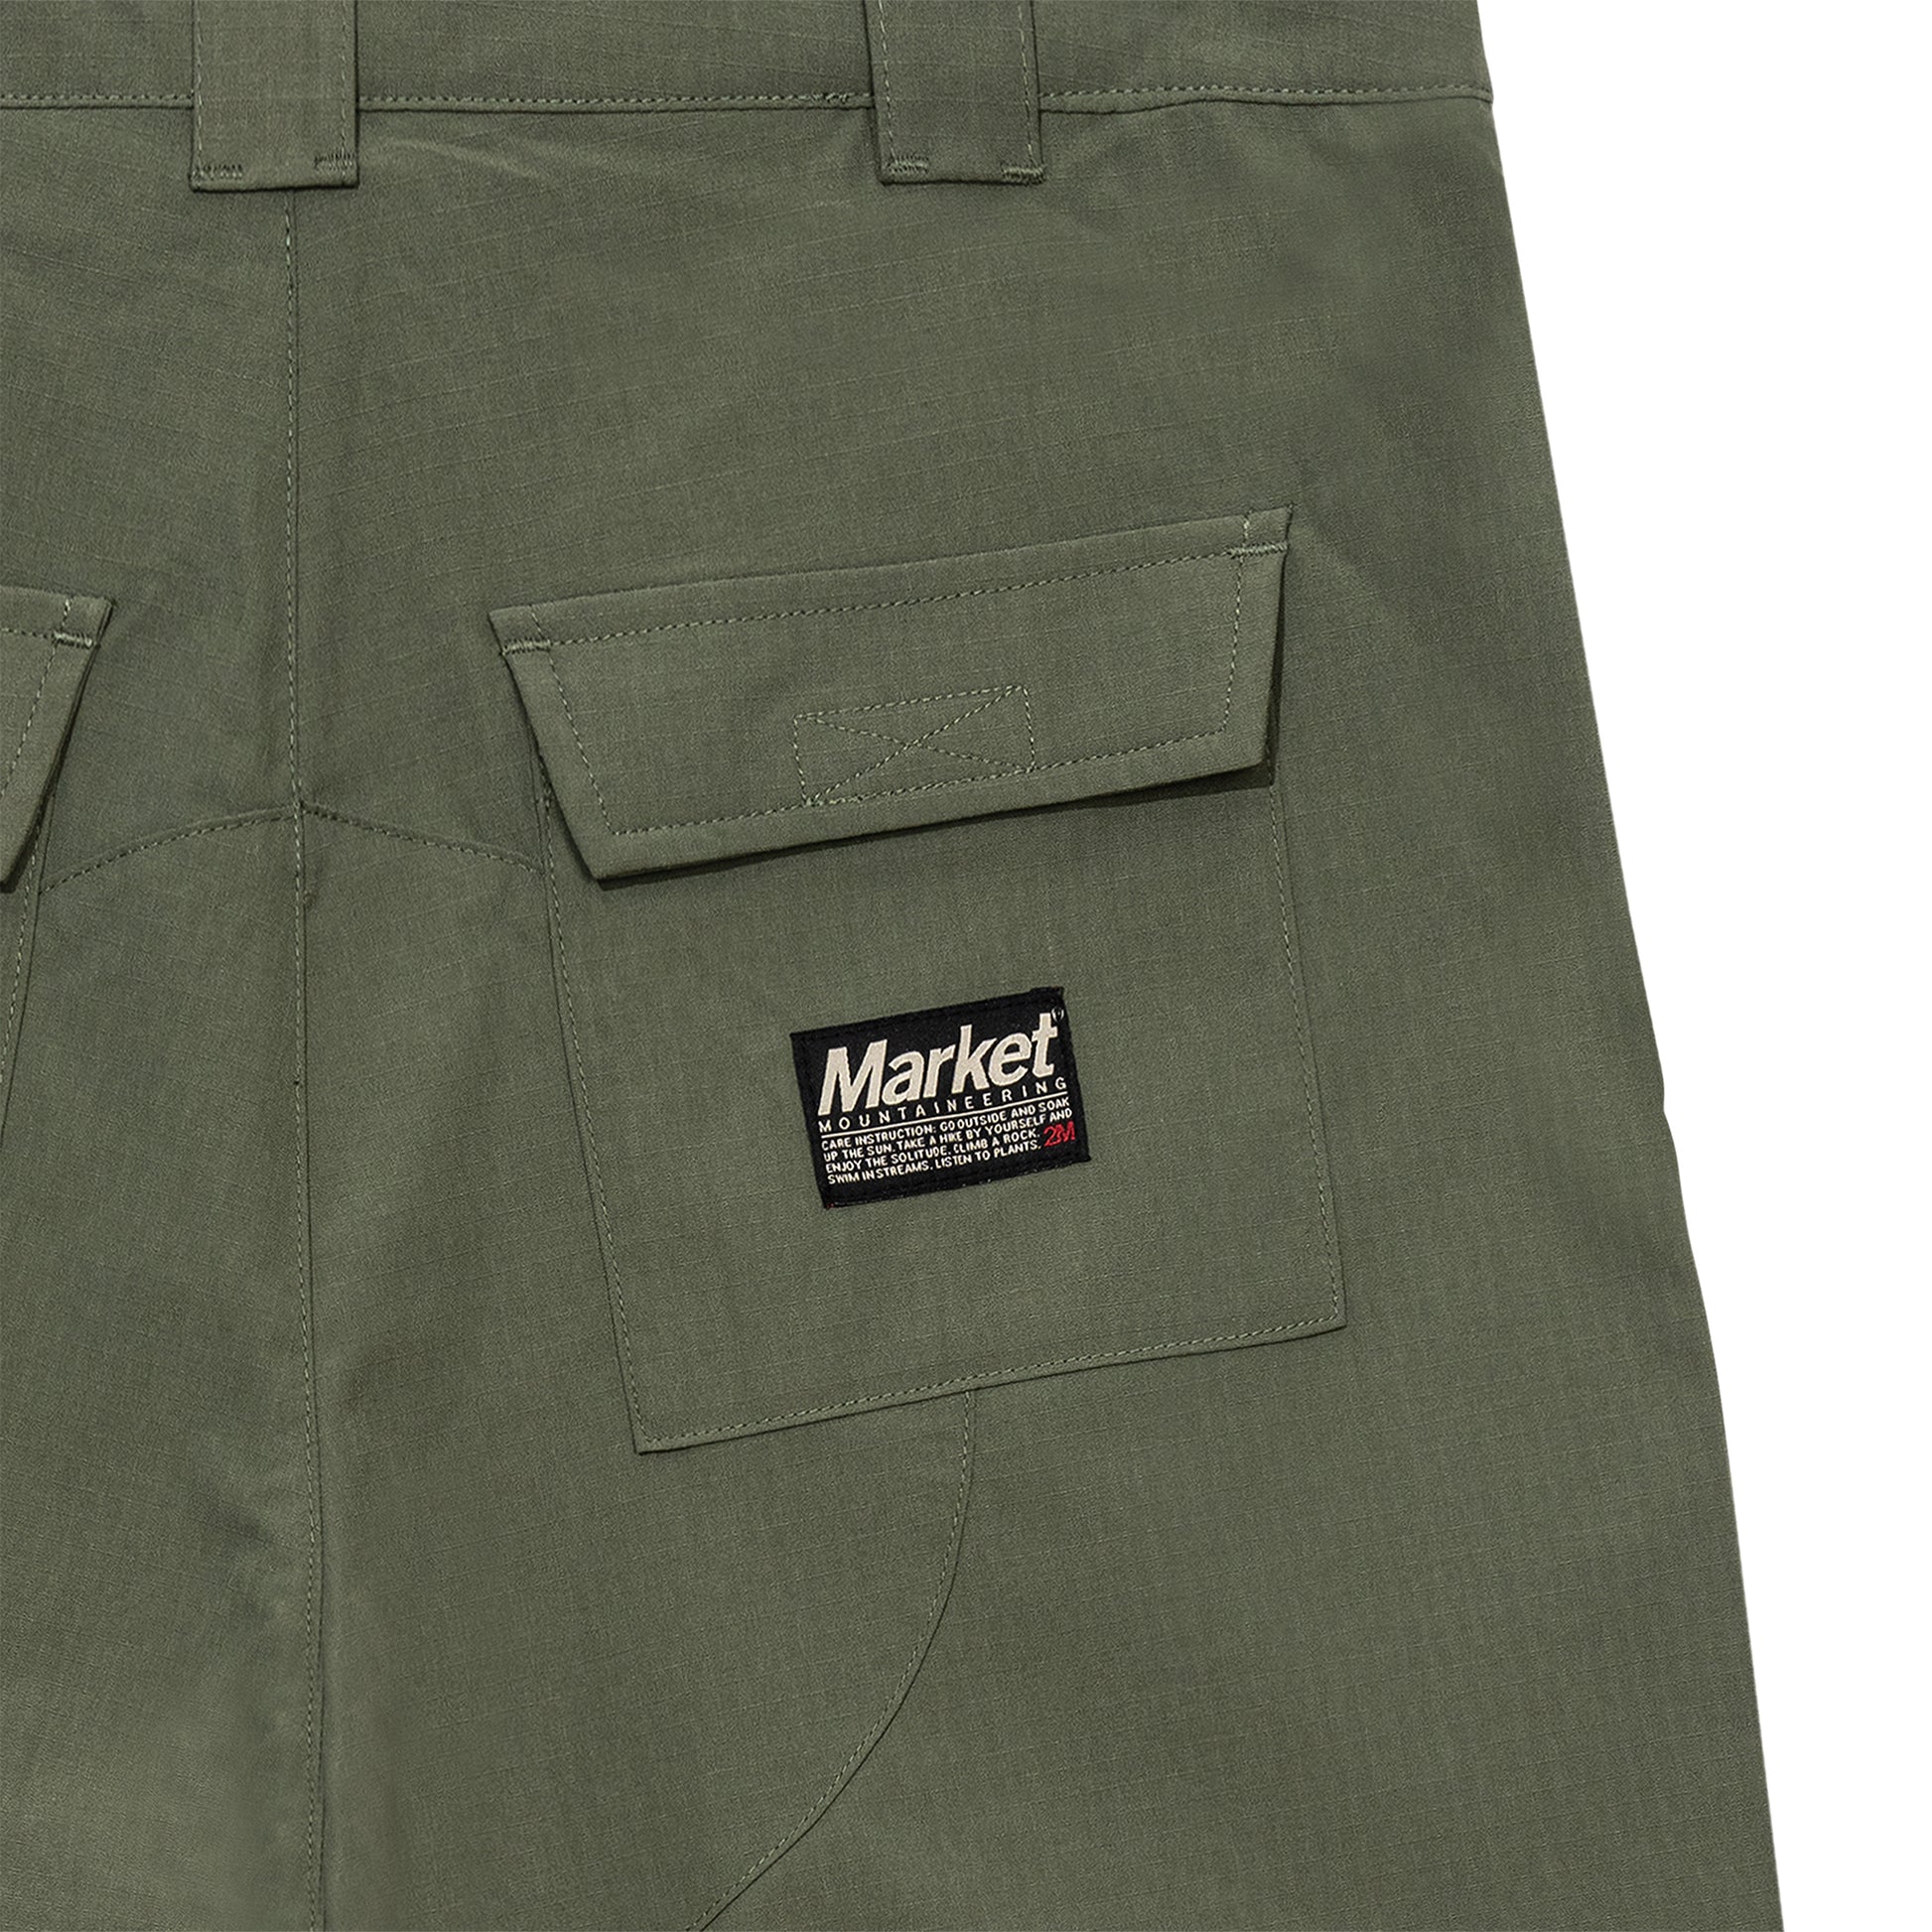 MARKET clothing brand MORAINE PANTS. Find more graphic tees, sweatpants, shorts and more bottoms at MarketStudios.com. Formally Chinatown Market. 